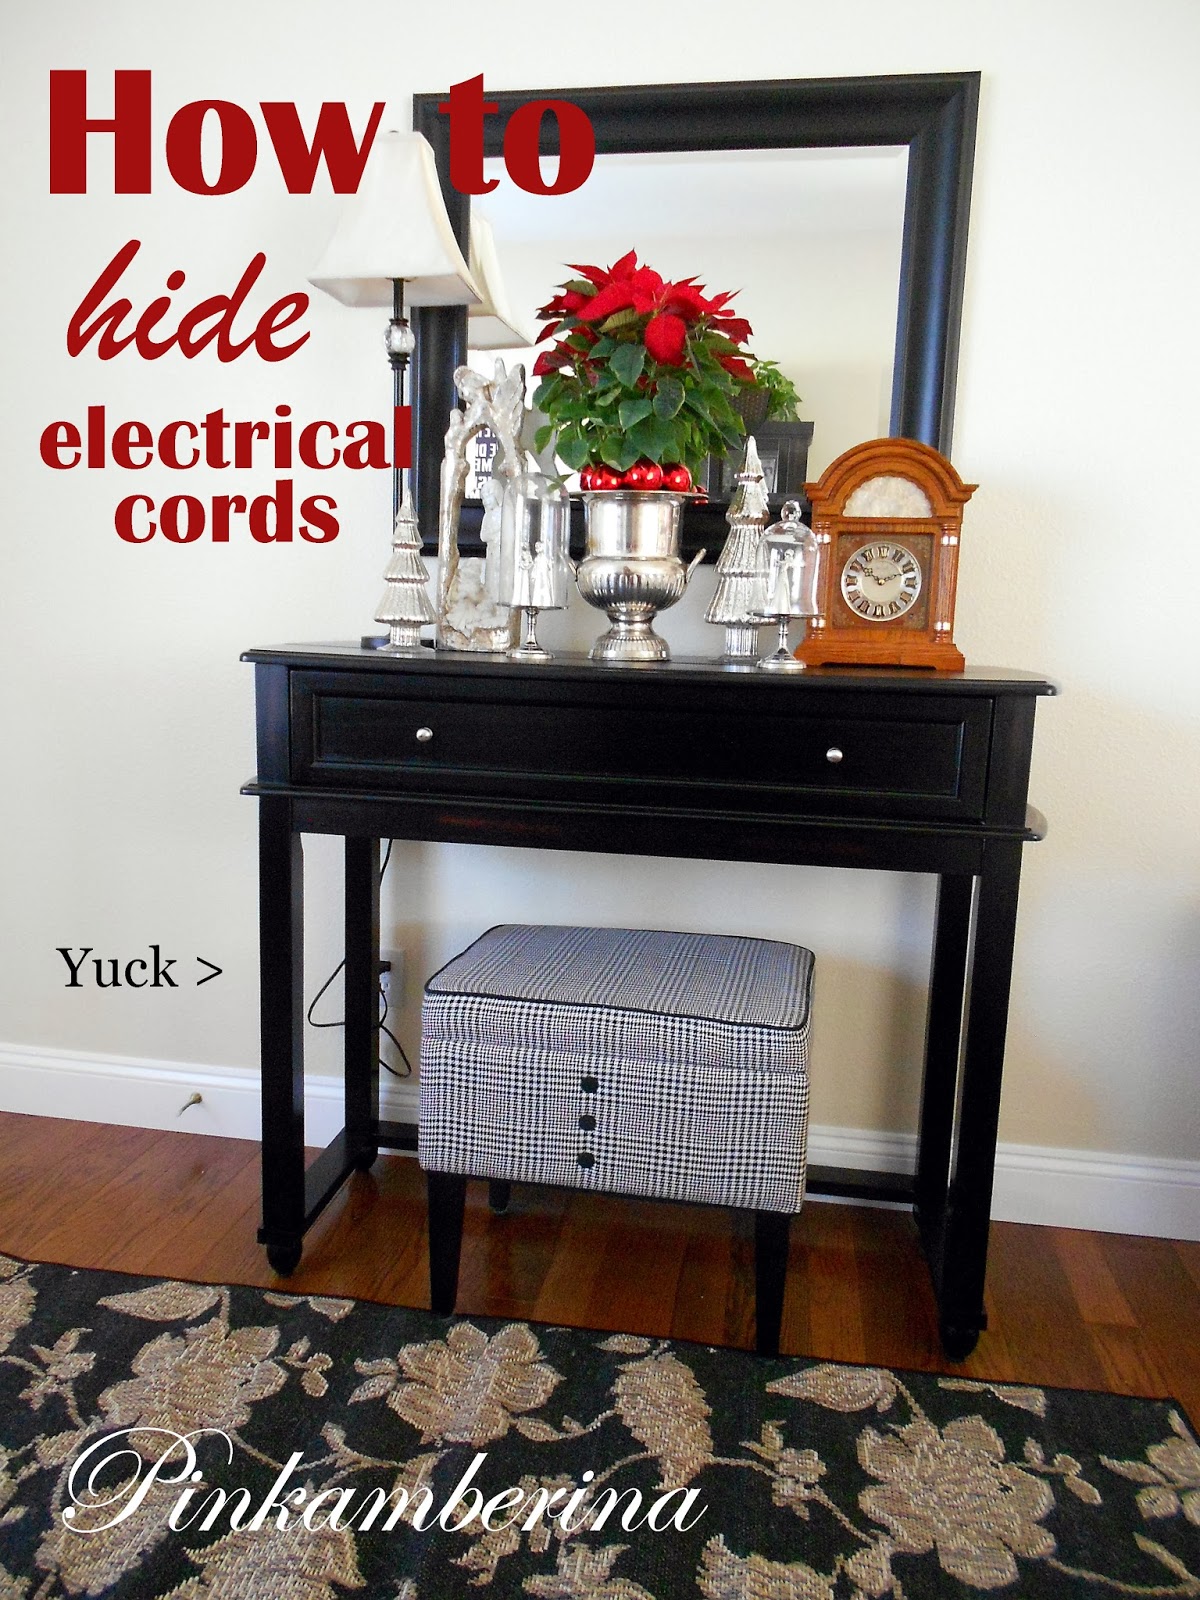 How to hide electrical cords